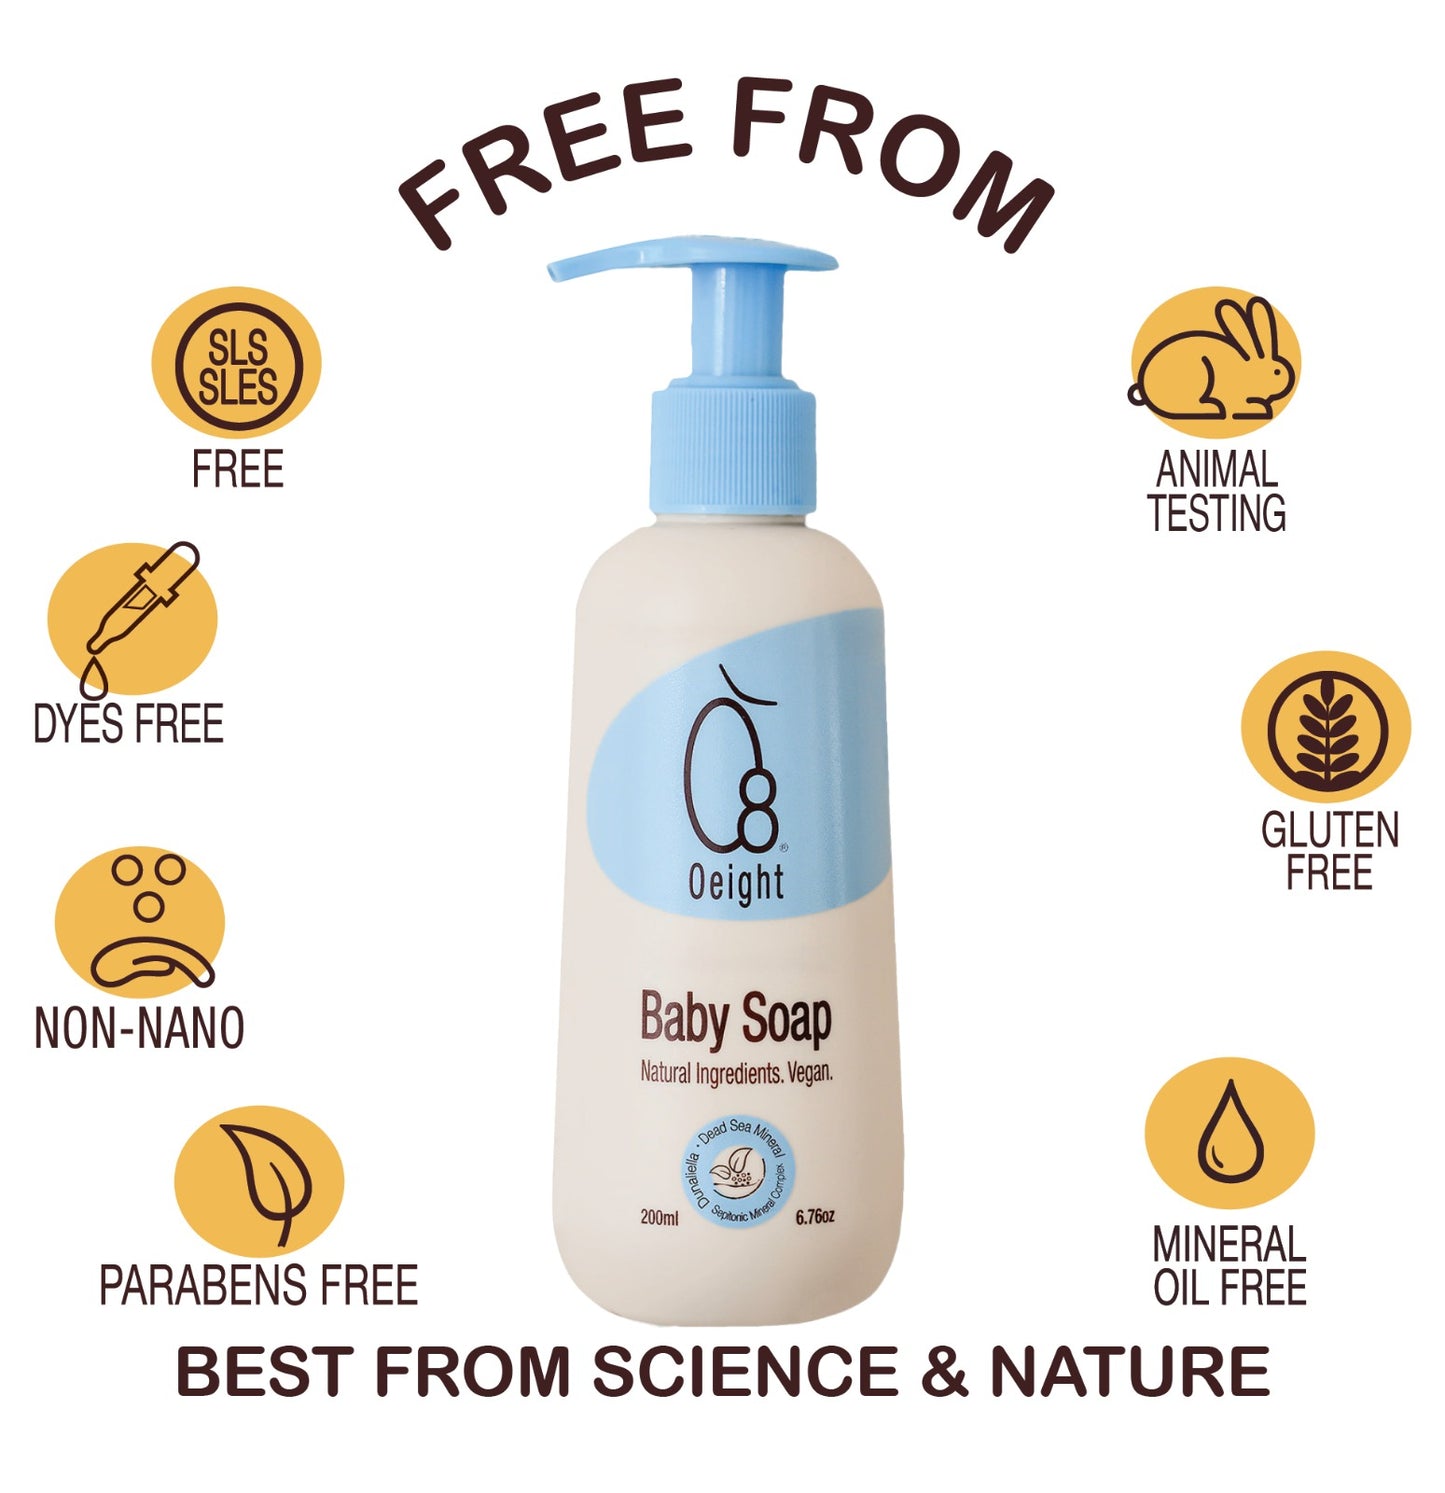 Oeight Baby Body Soap, Calming and encouraging skin restoration, gentle and sensitive | Not tested on animals, vegan, SLS free, gluten free